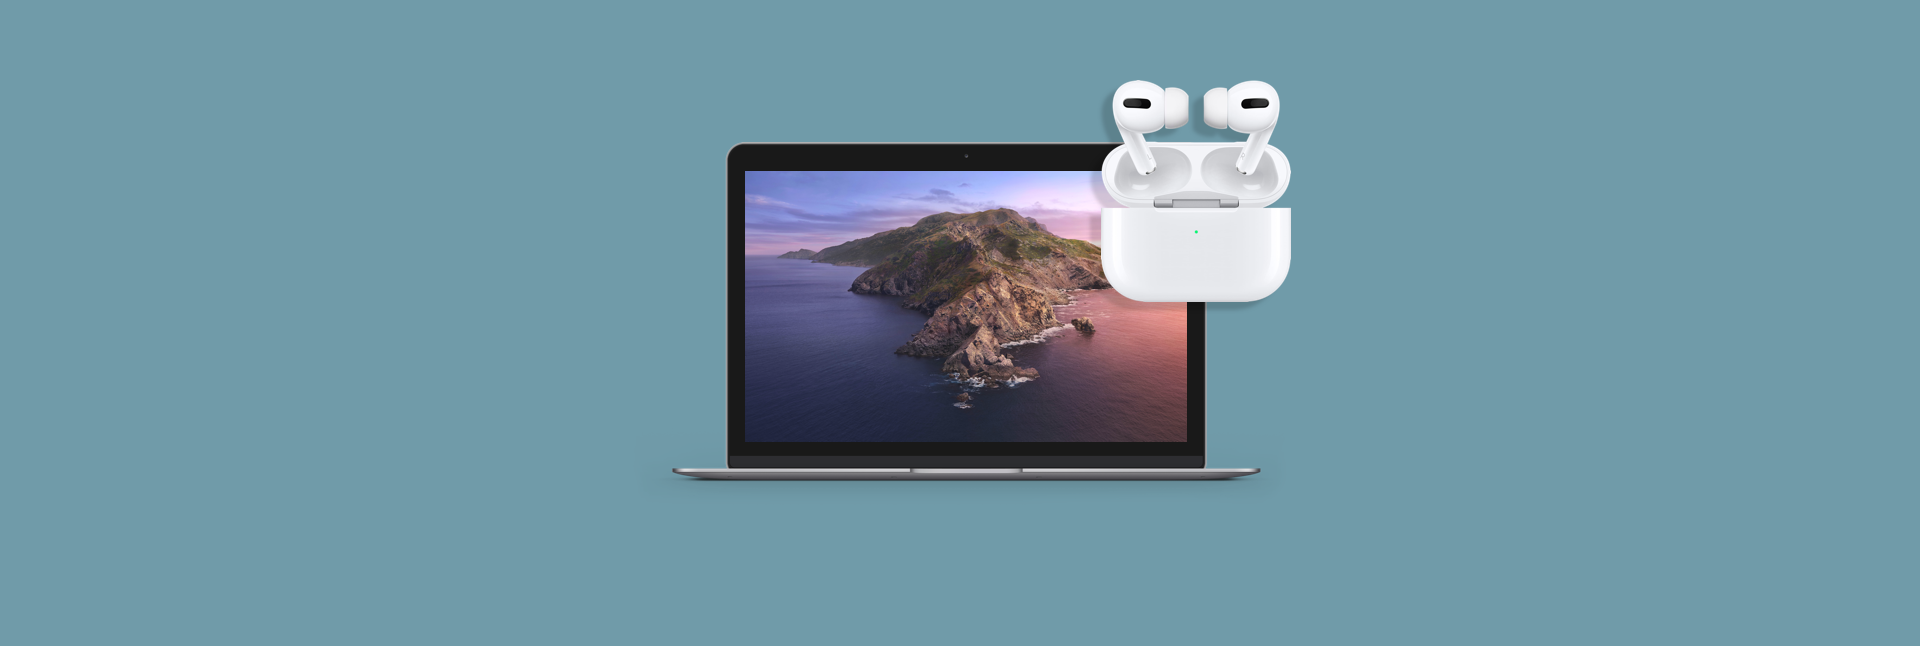 airpods wont connect to macbook